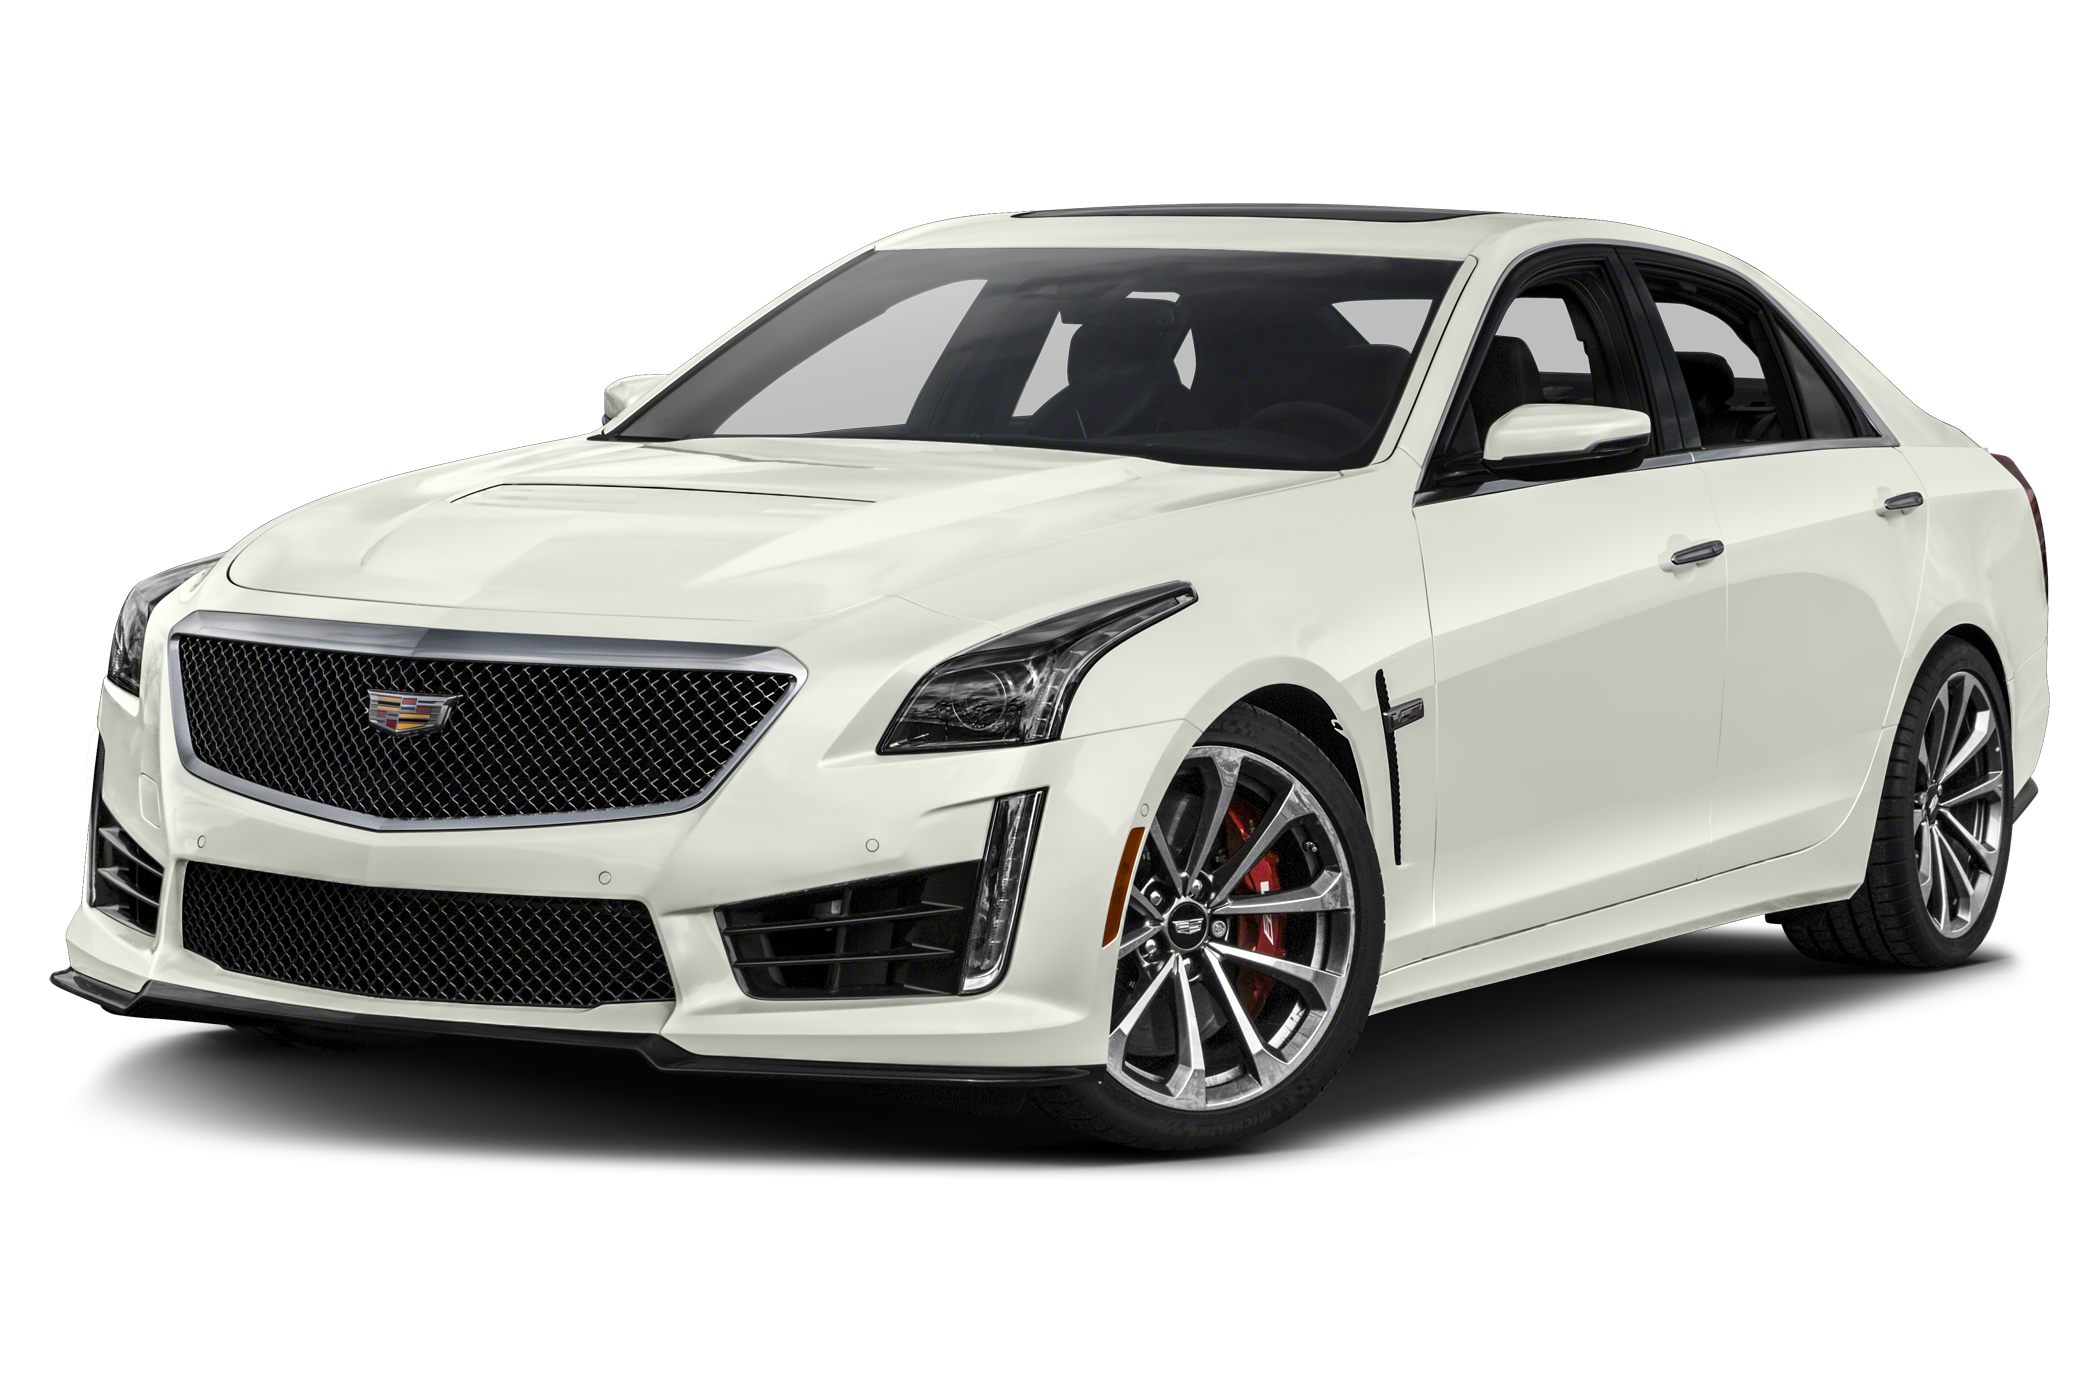 Cadillac CTS-V Backgrounds, Compatible - PC, Mobile, Gadgets| 2100x1386 px